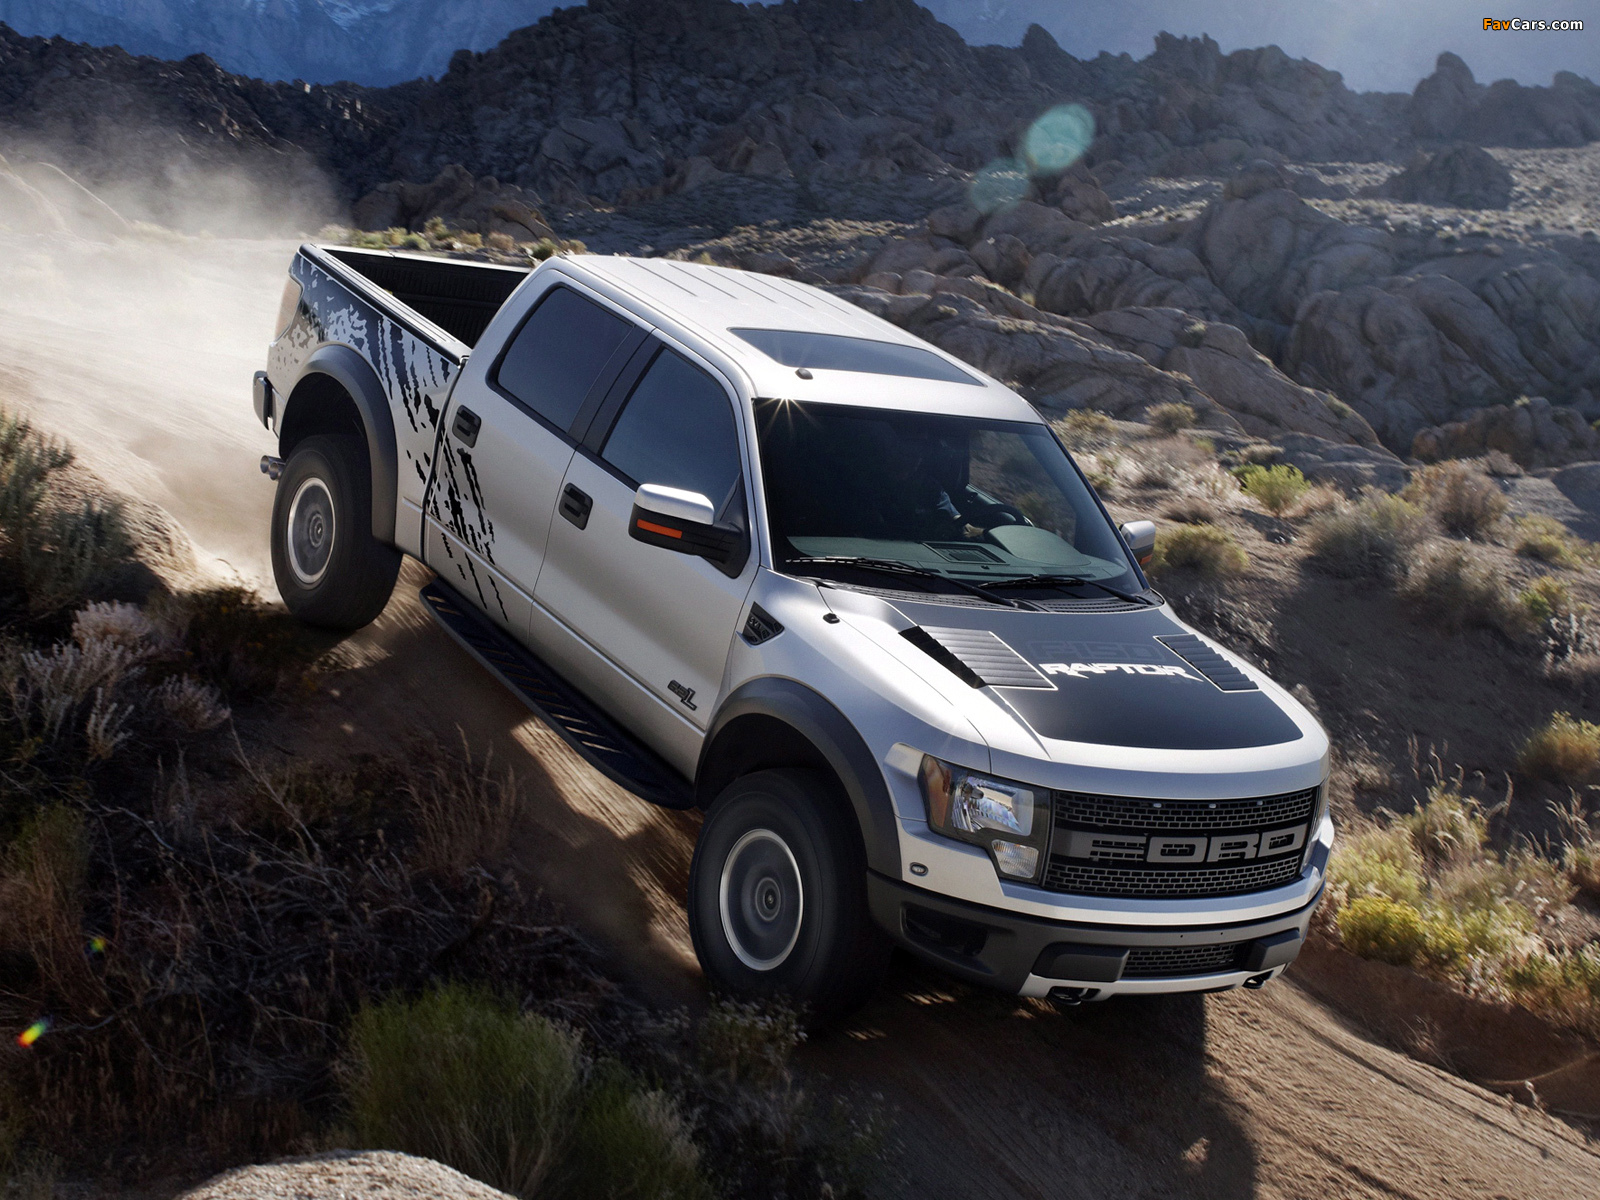 2017 Ford F-150 SVT Raptor SuperCrew 4WD For Sale in ...